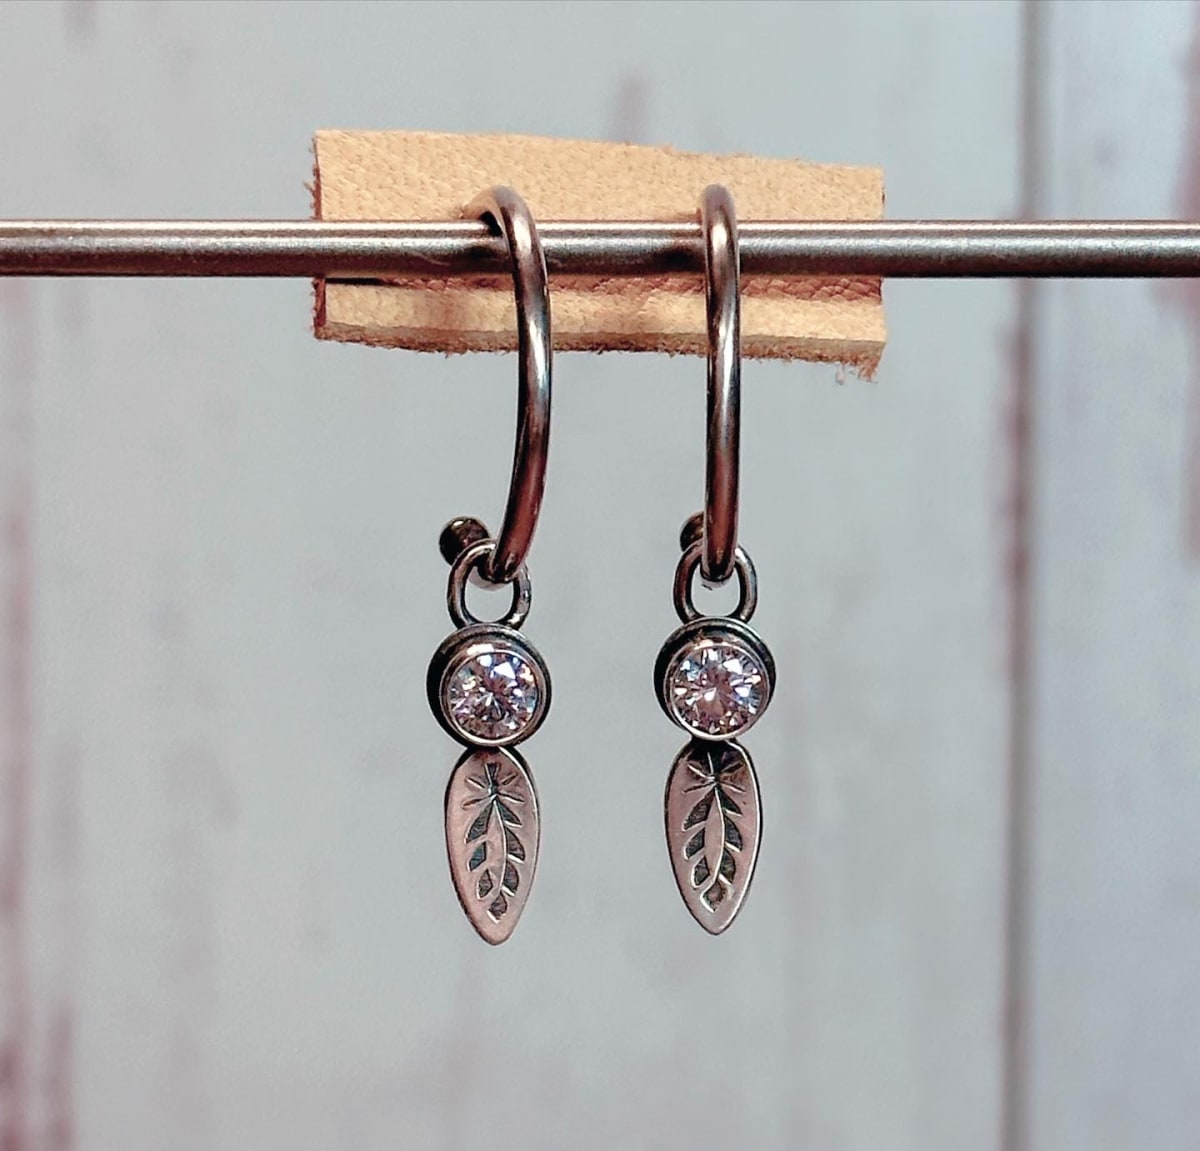 "Angel Feather Charmed Hoops" - Sterling Siver and CZ by Shasta Brooks  Image: All Art © Shasta Brooks Studio LLC